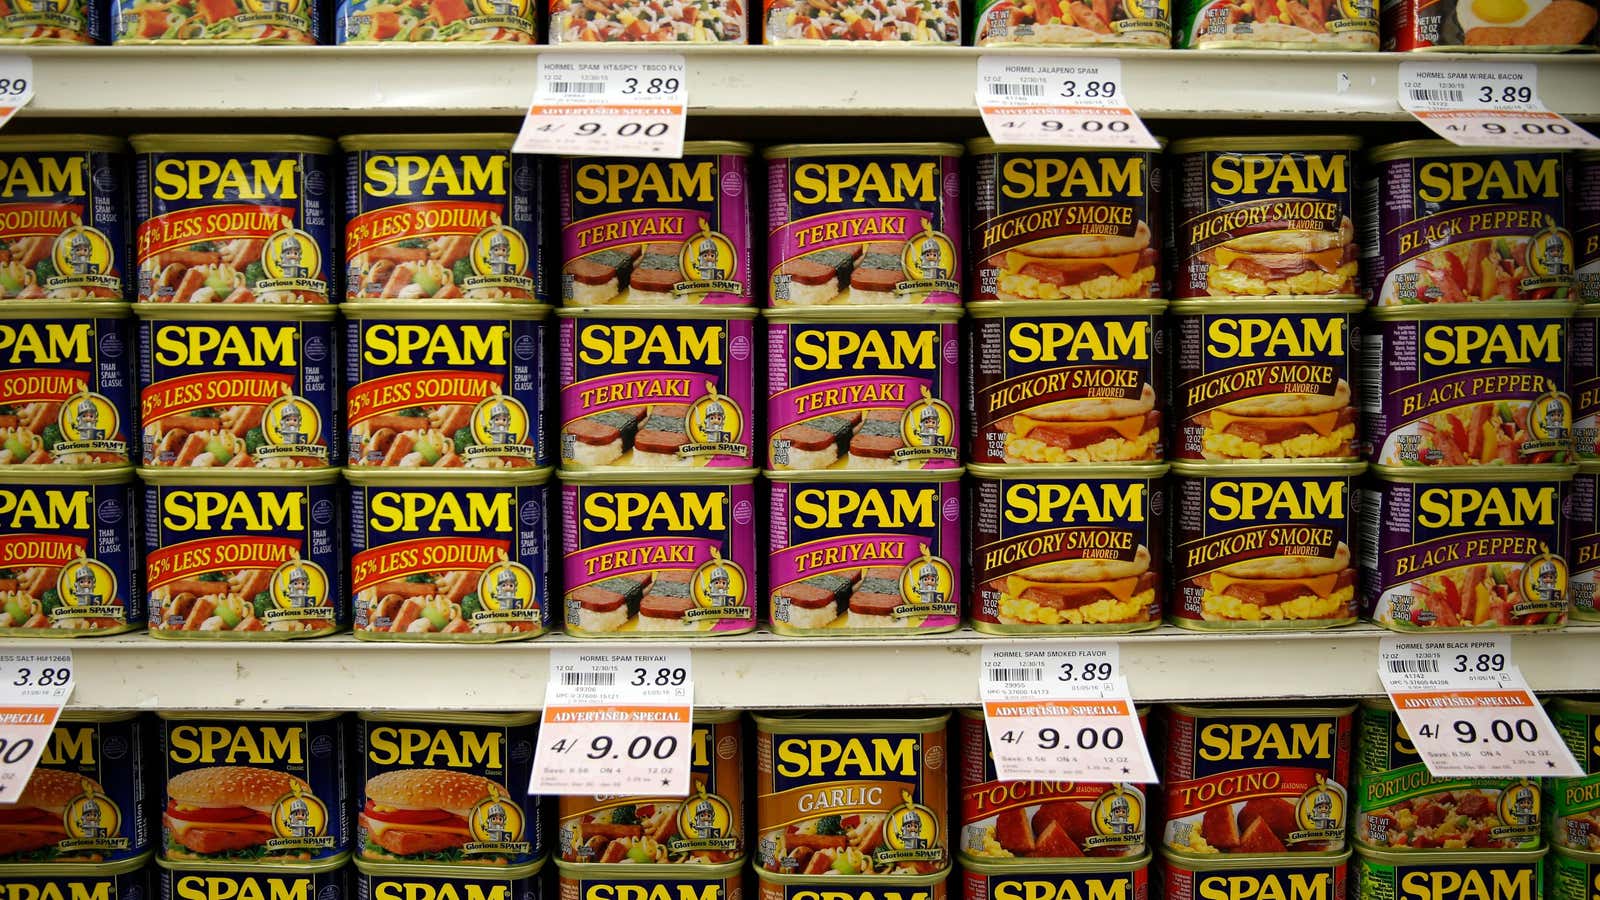 “Cold or hot… Spam hits the spot.”